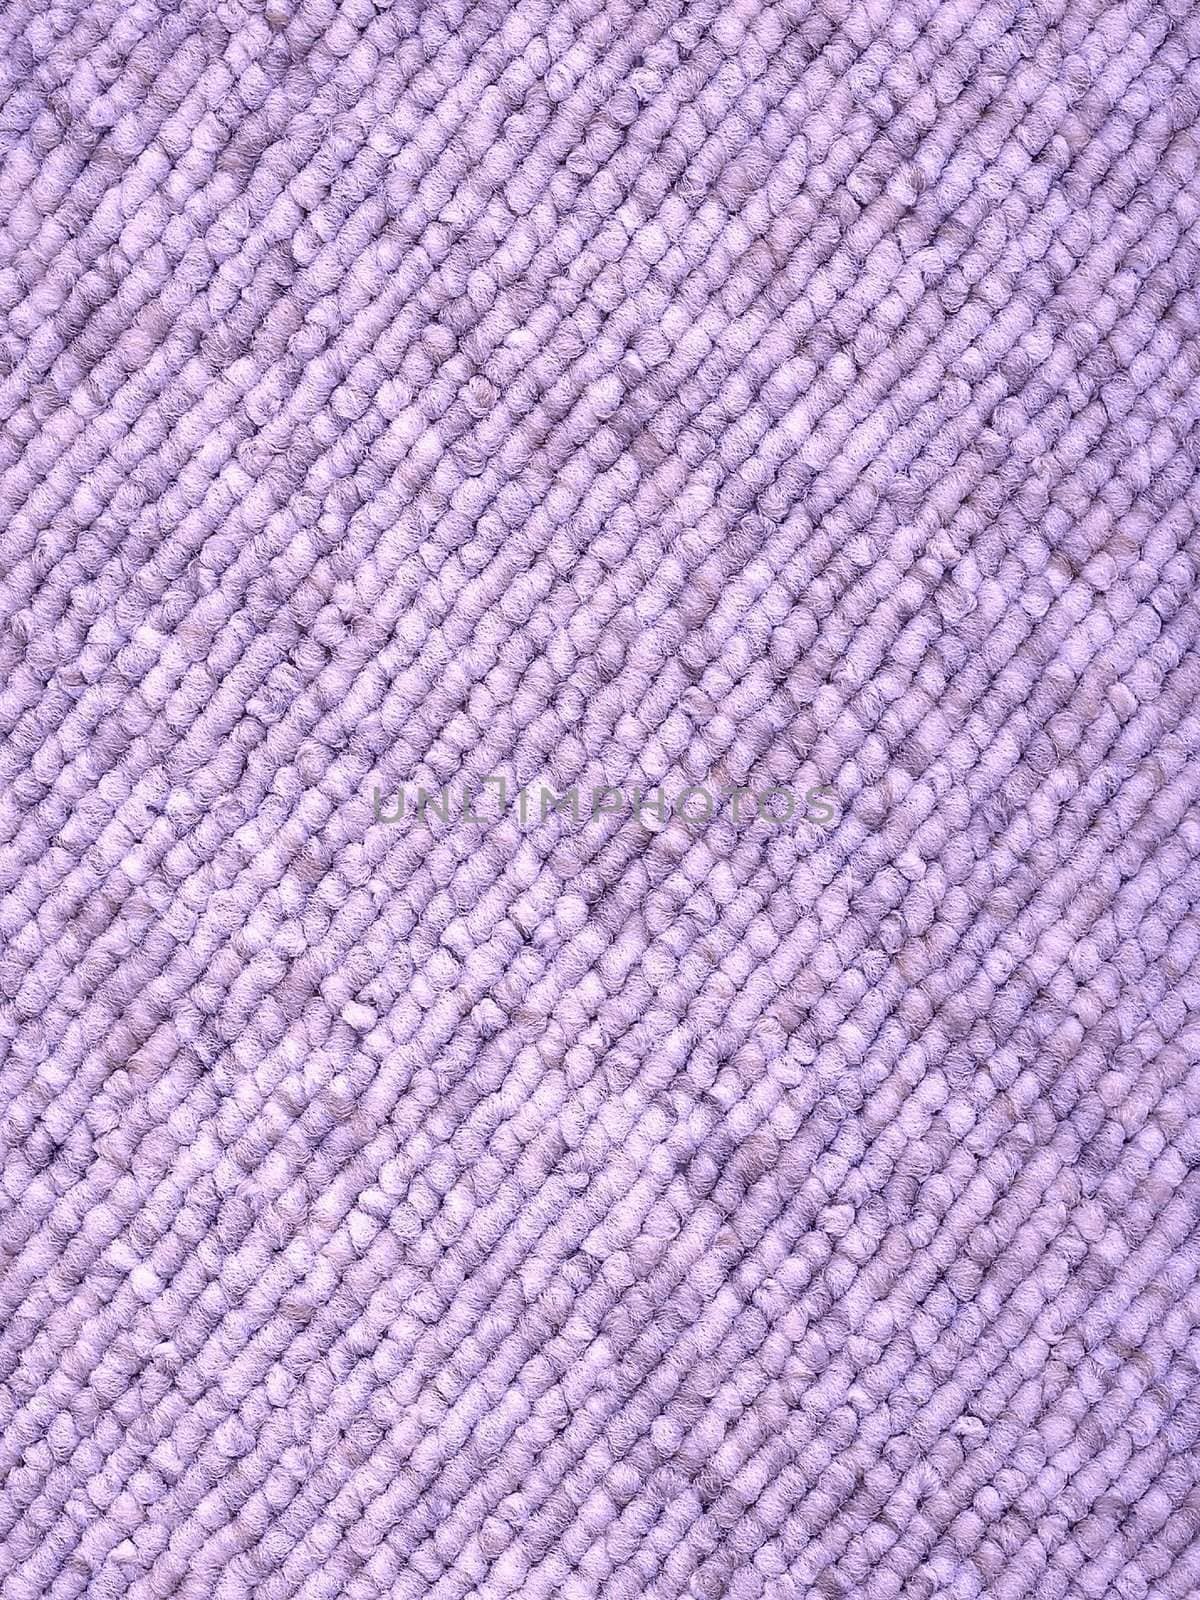 Sample piece of a Loop-woven carpet in a modern light lilac color tone. A useful picture for architects and people doing home decorations or a nice texture background for related subjects.